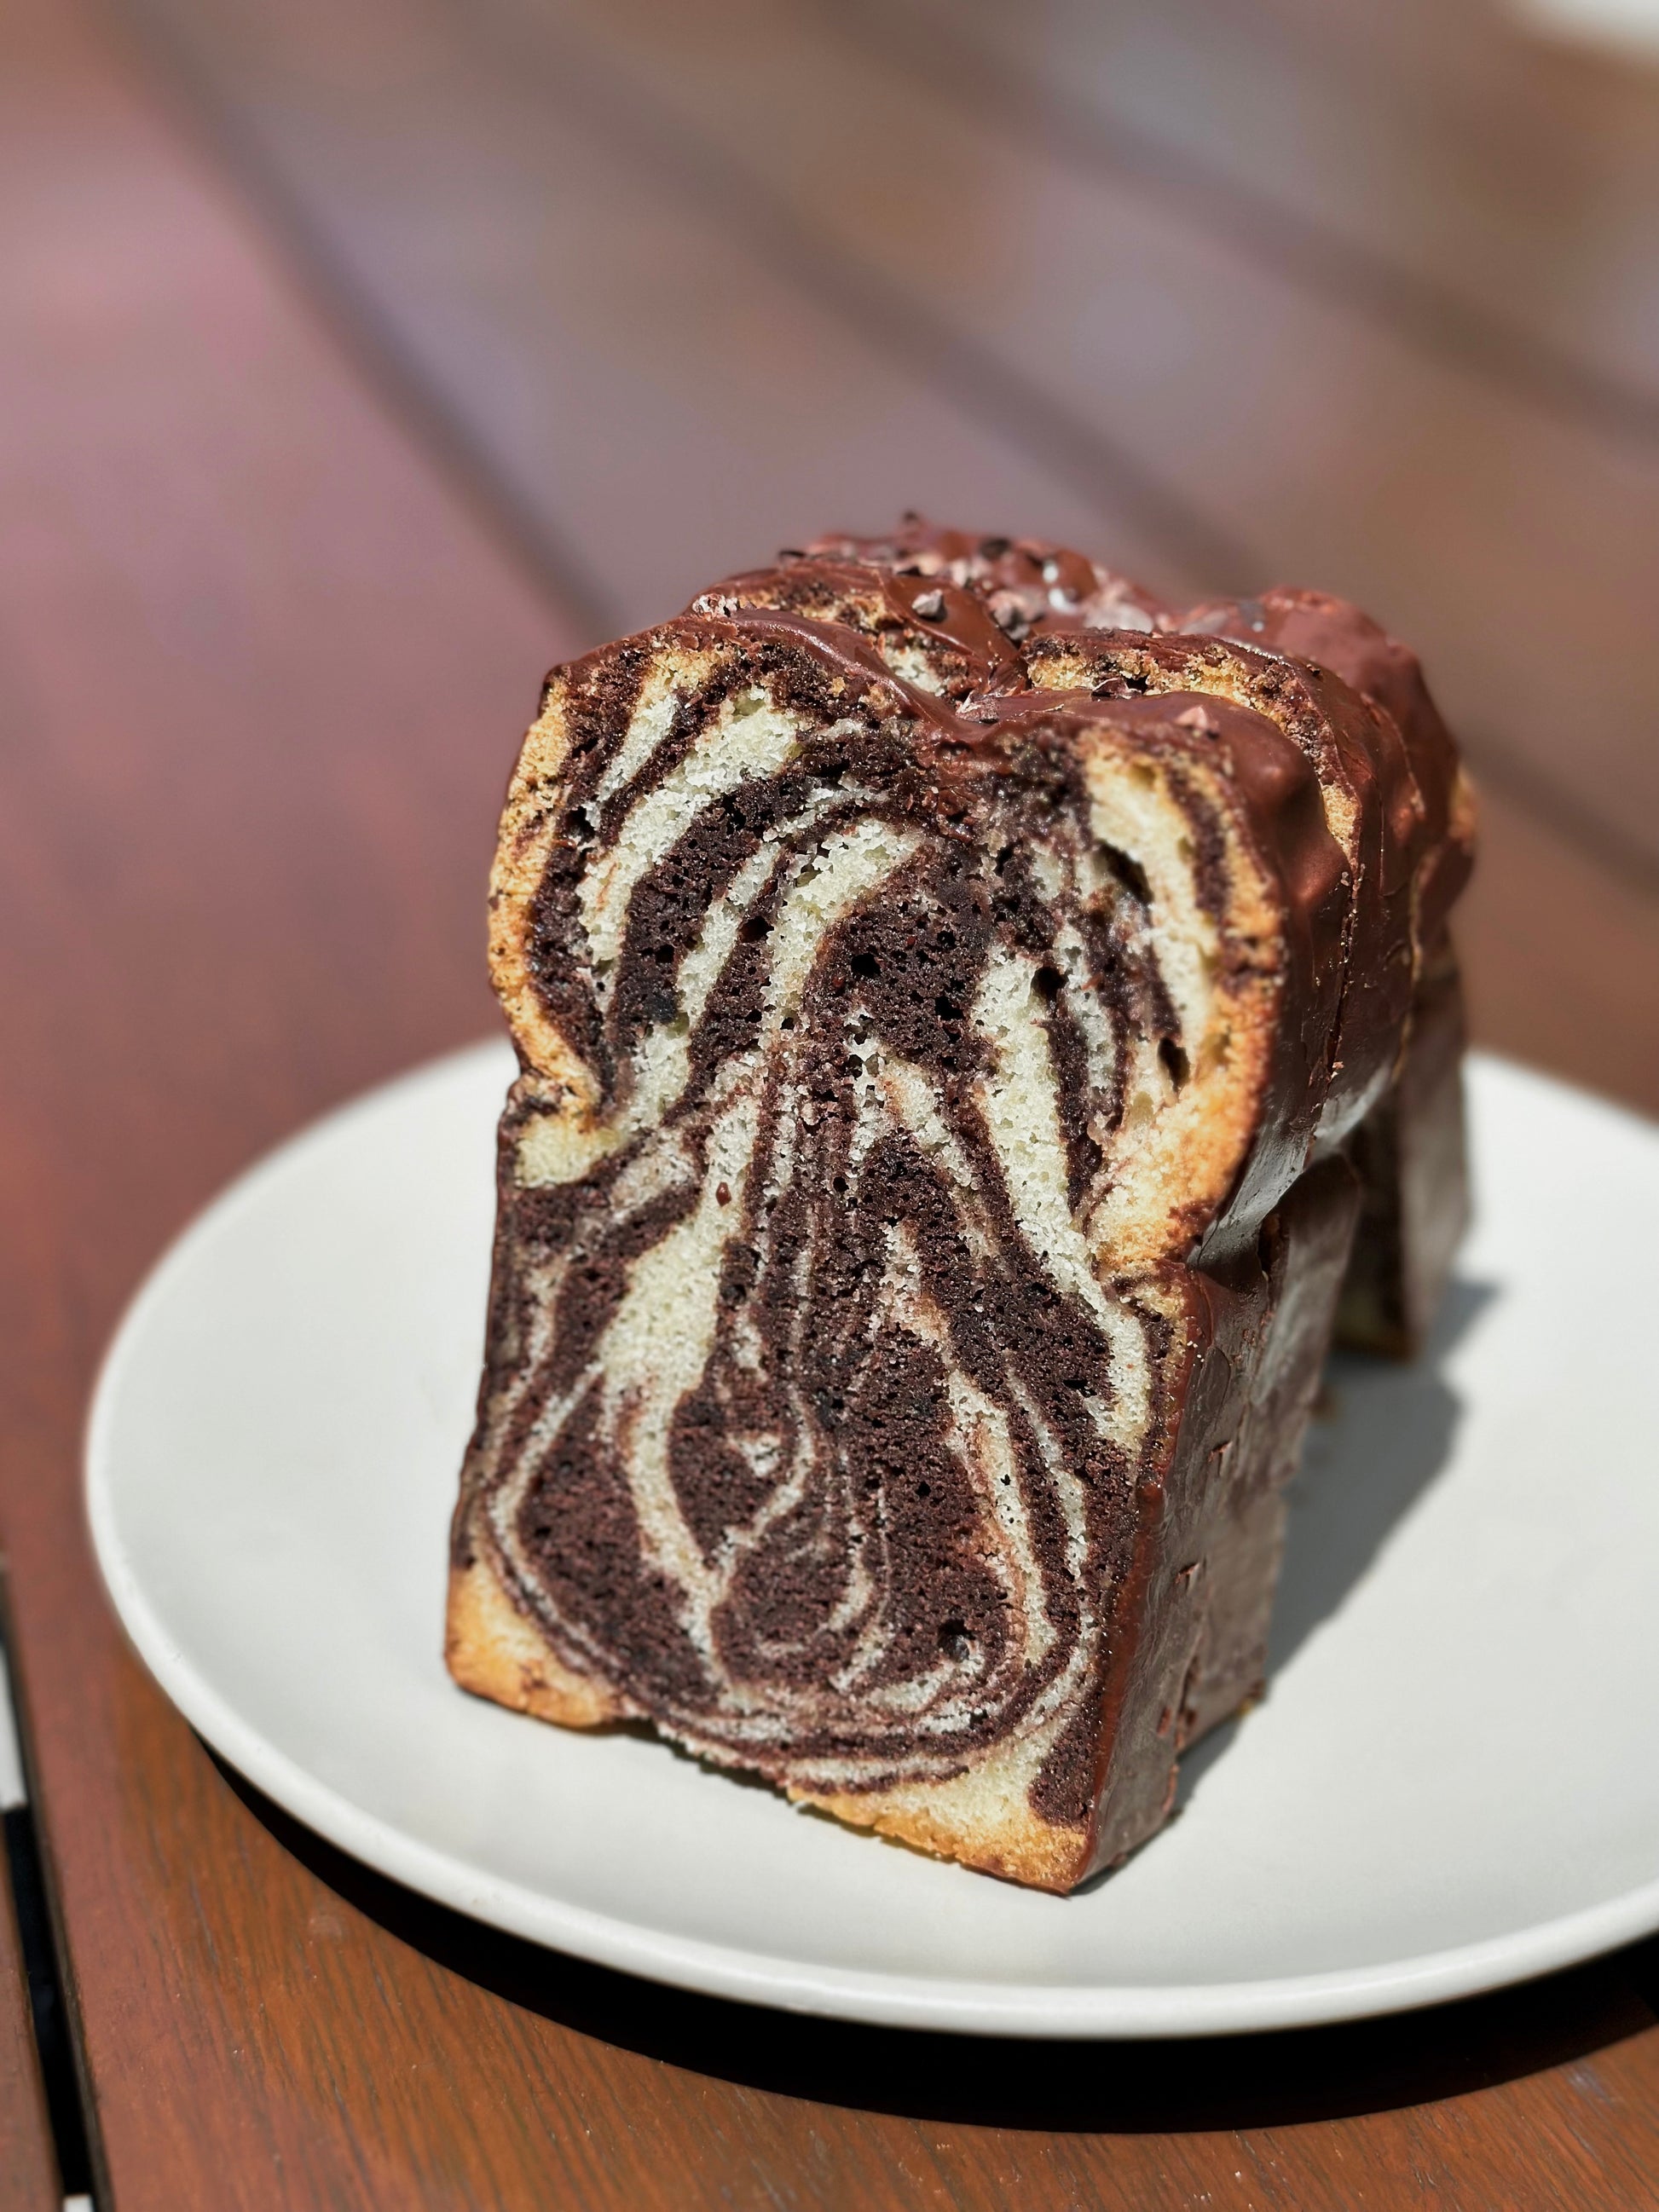 Slice of Marble Cake made with premium Valrhona cocoa powder and pure vanilla extract. The combination of moist vanilla and rich chocolate cake swirled together creates a delightful treat for any occasion.